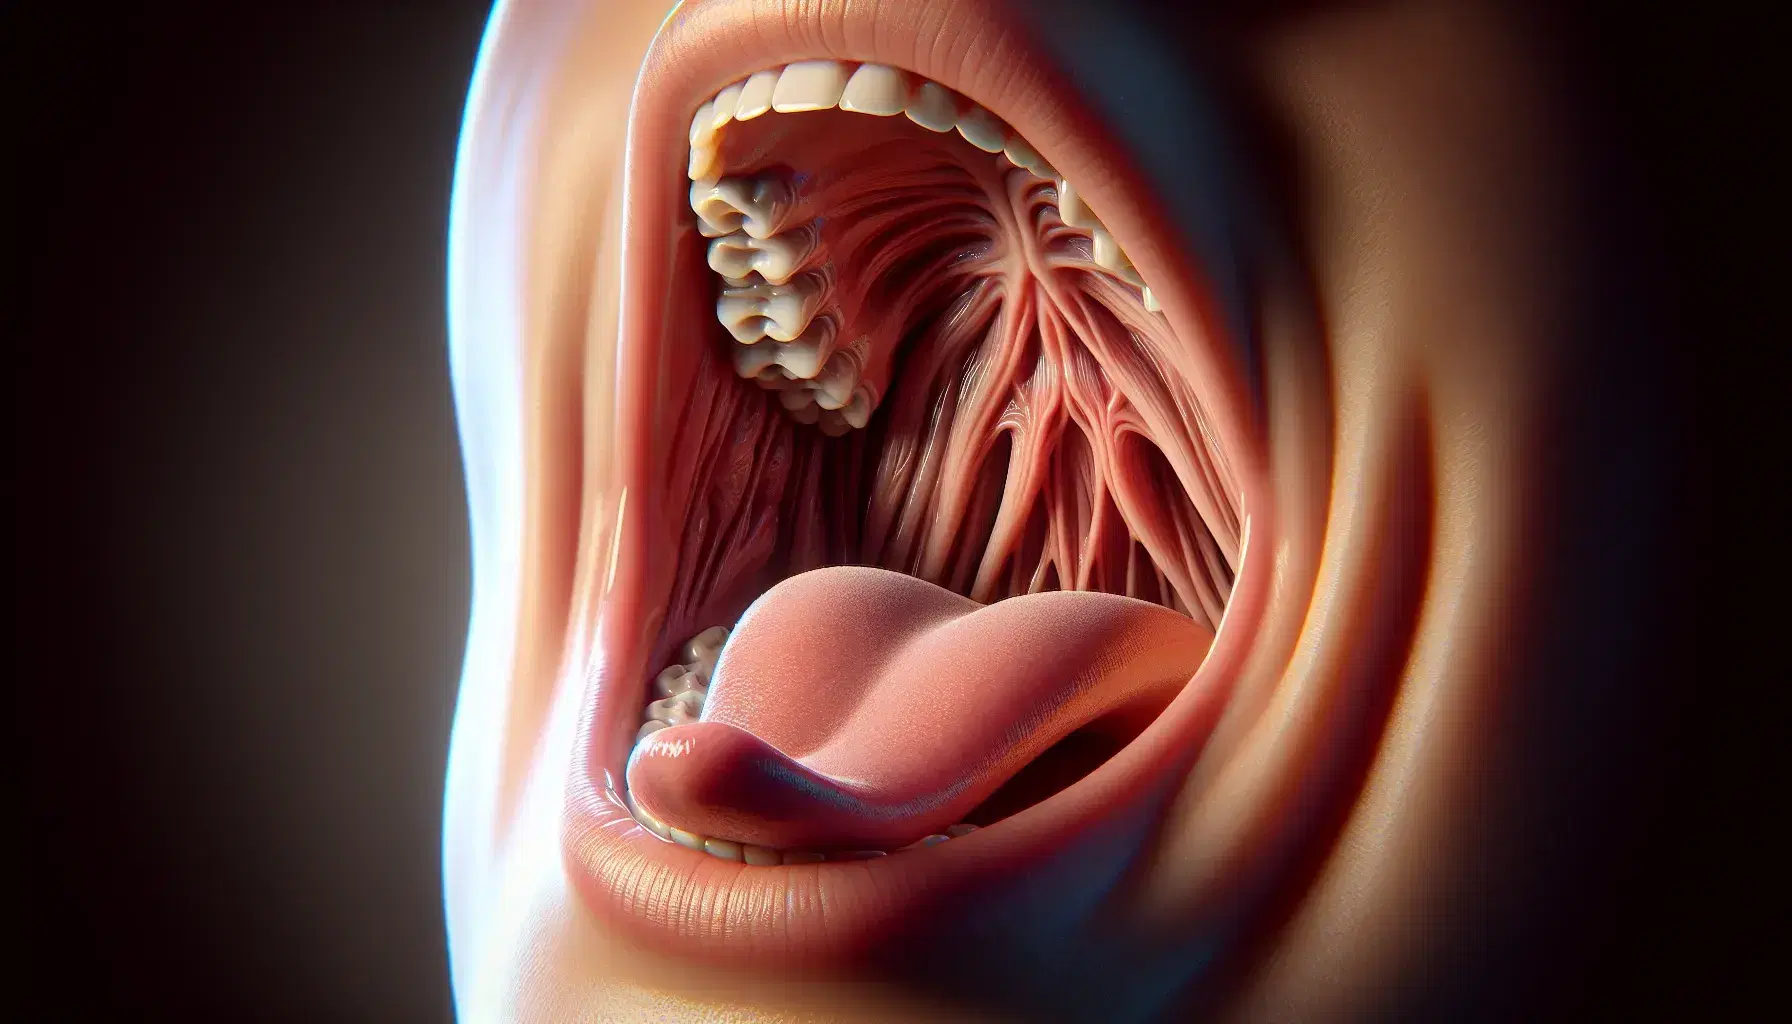 Close-up view of a human mouth with the uvula visible, tongue raised towards it, indicating speech, in a healthy pink oral cavity.